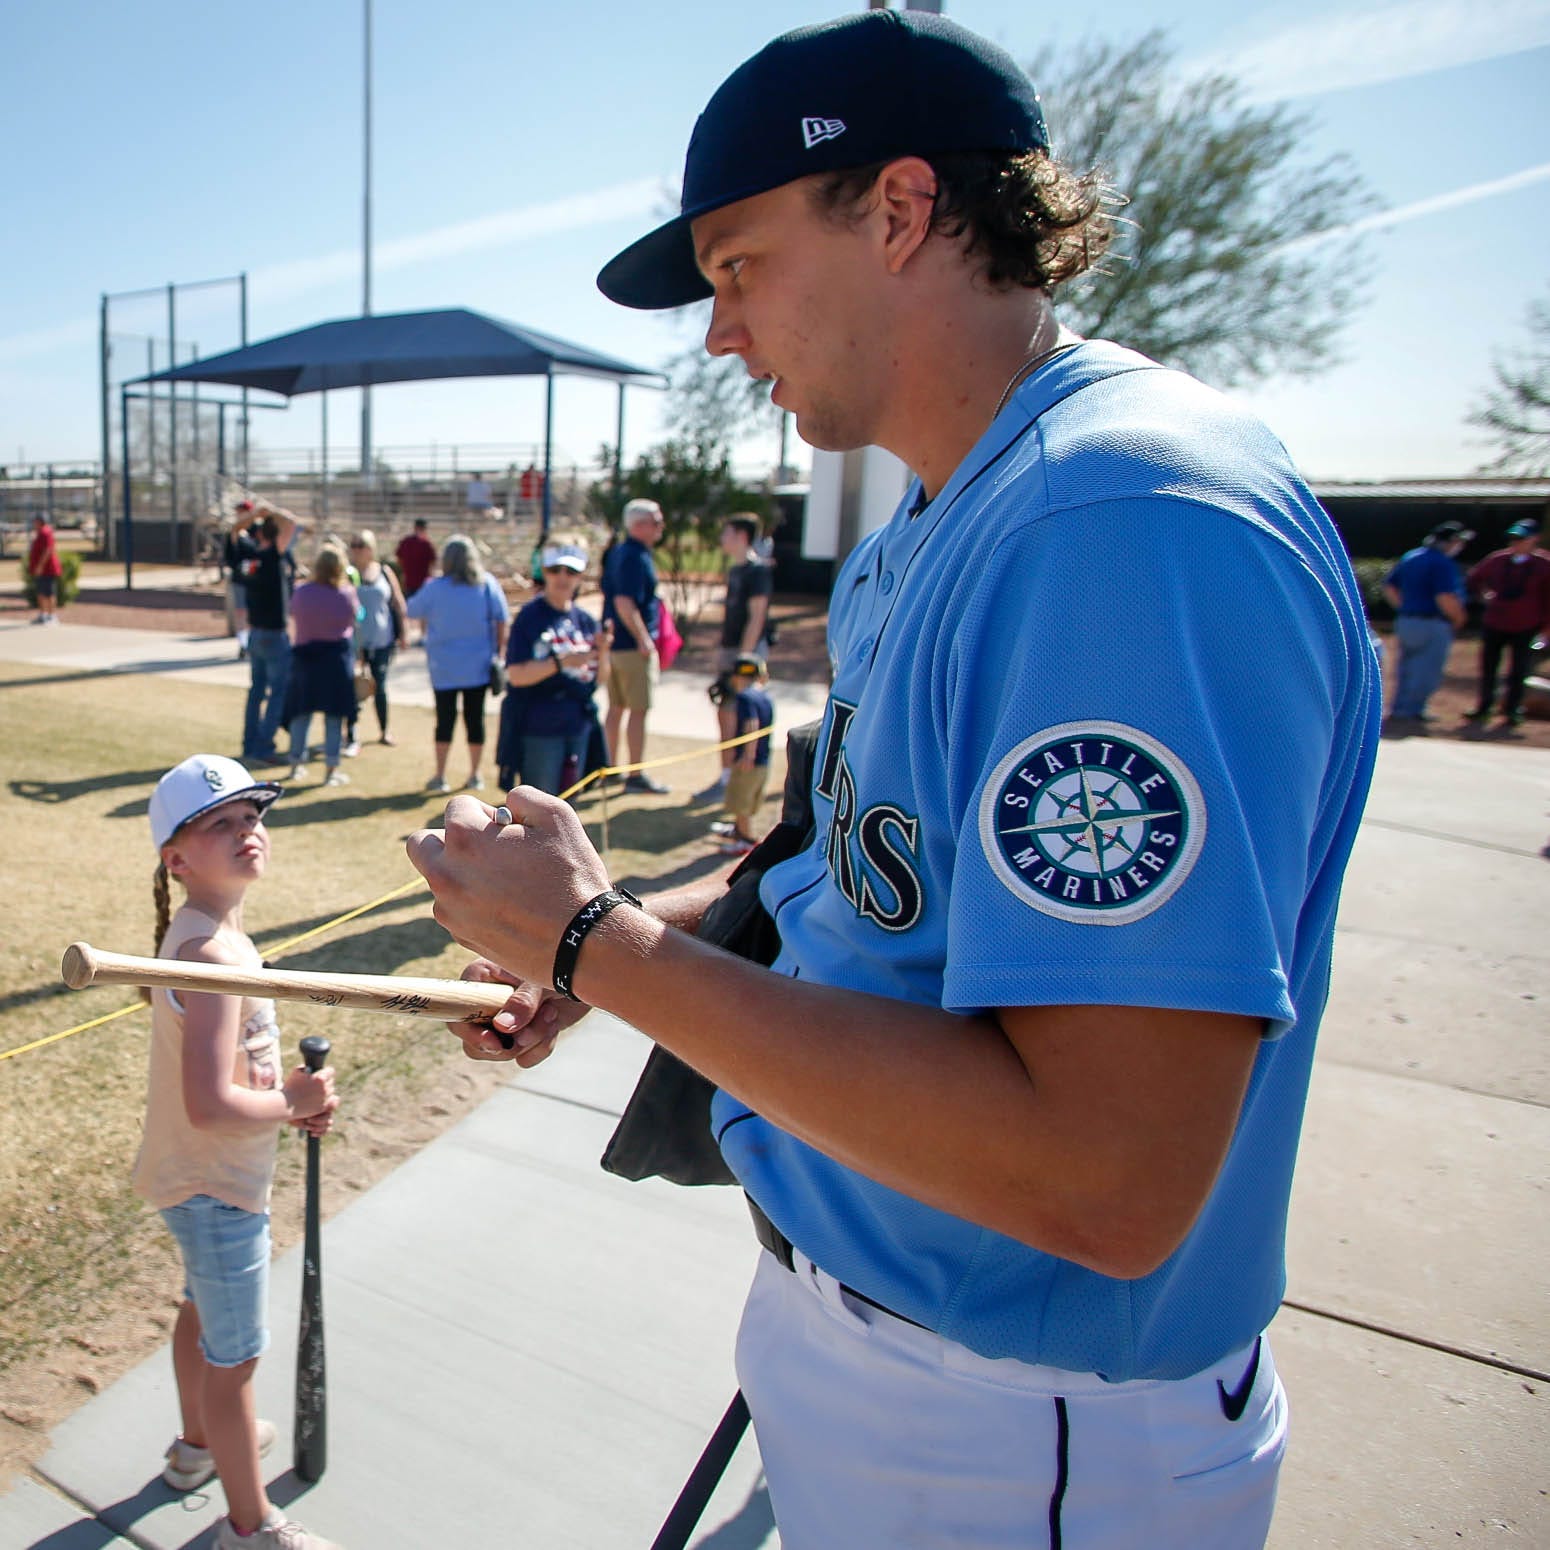 Mariners 2020 Spring Training — Day 7, by Mariners PR